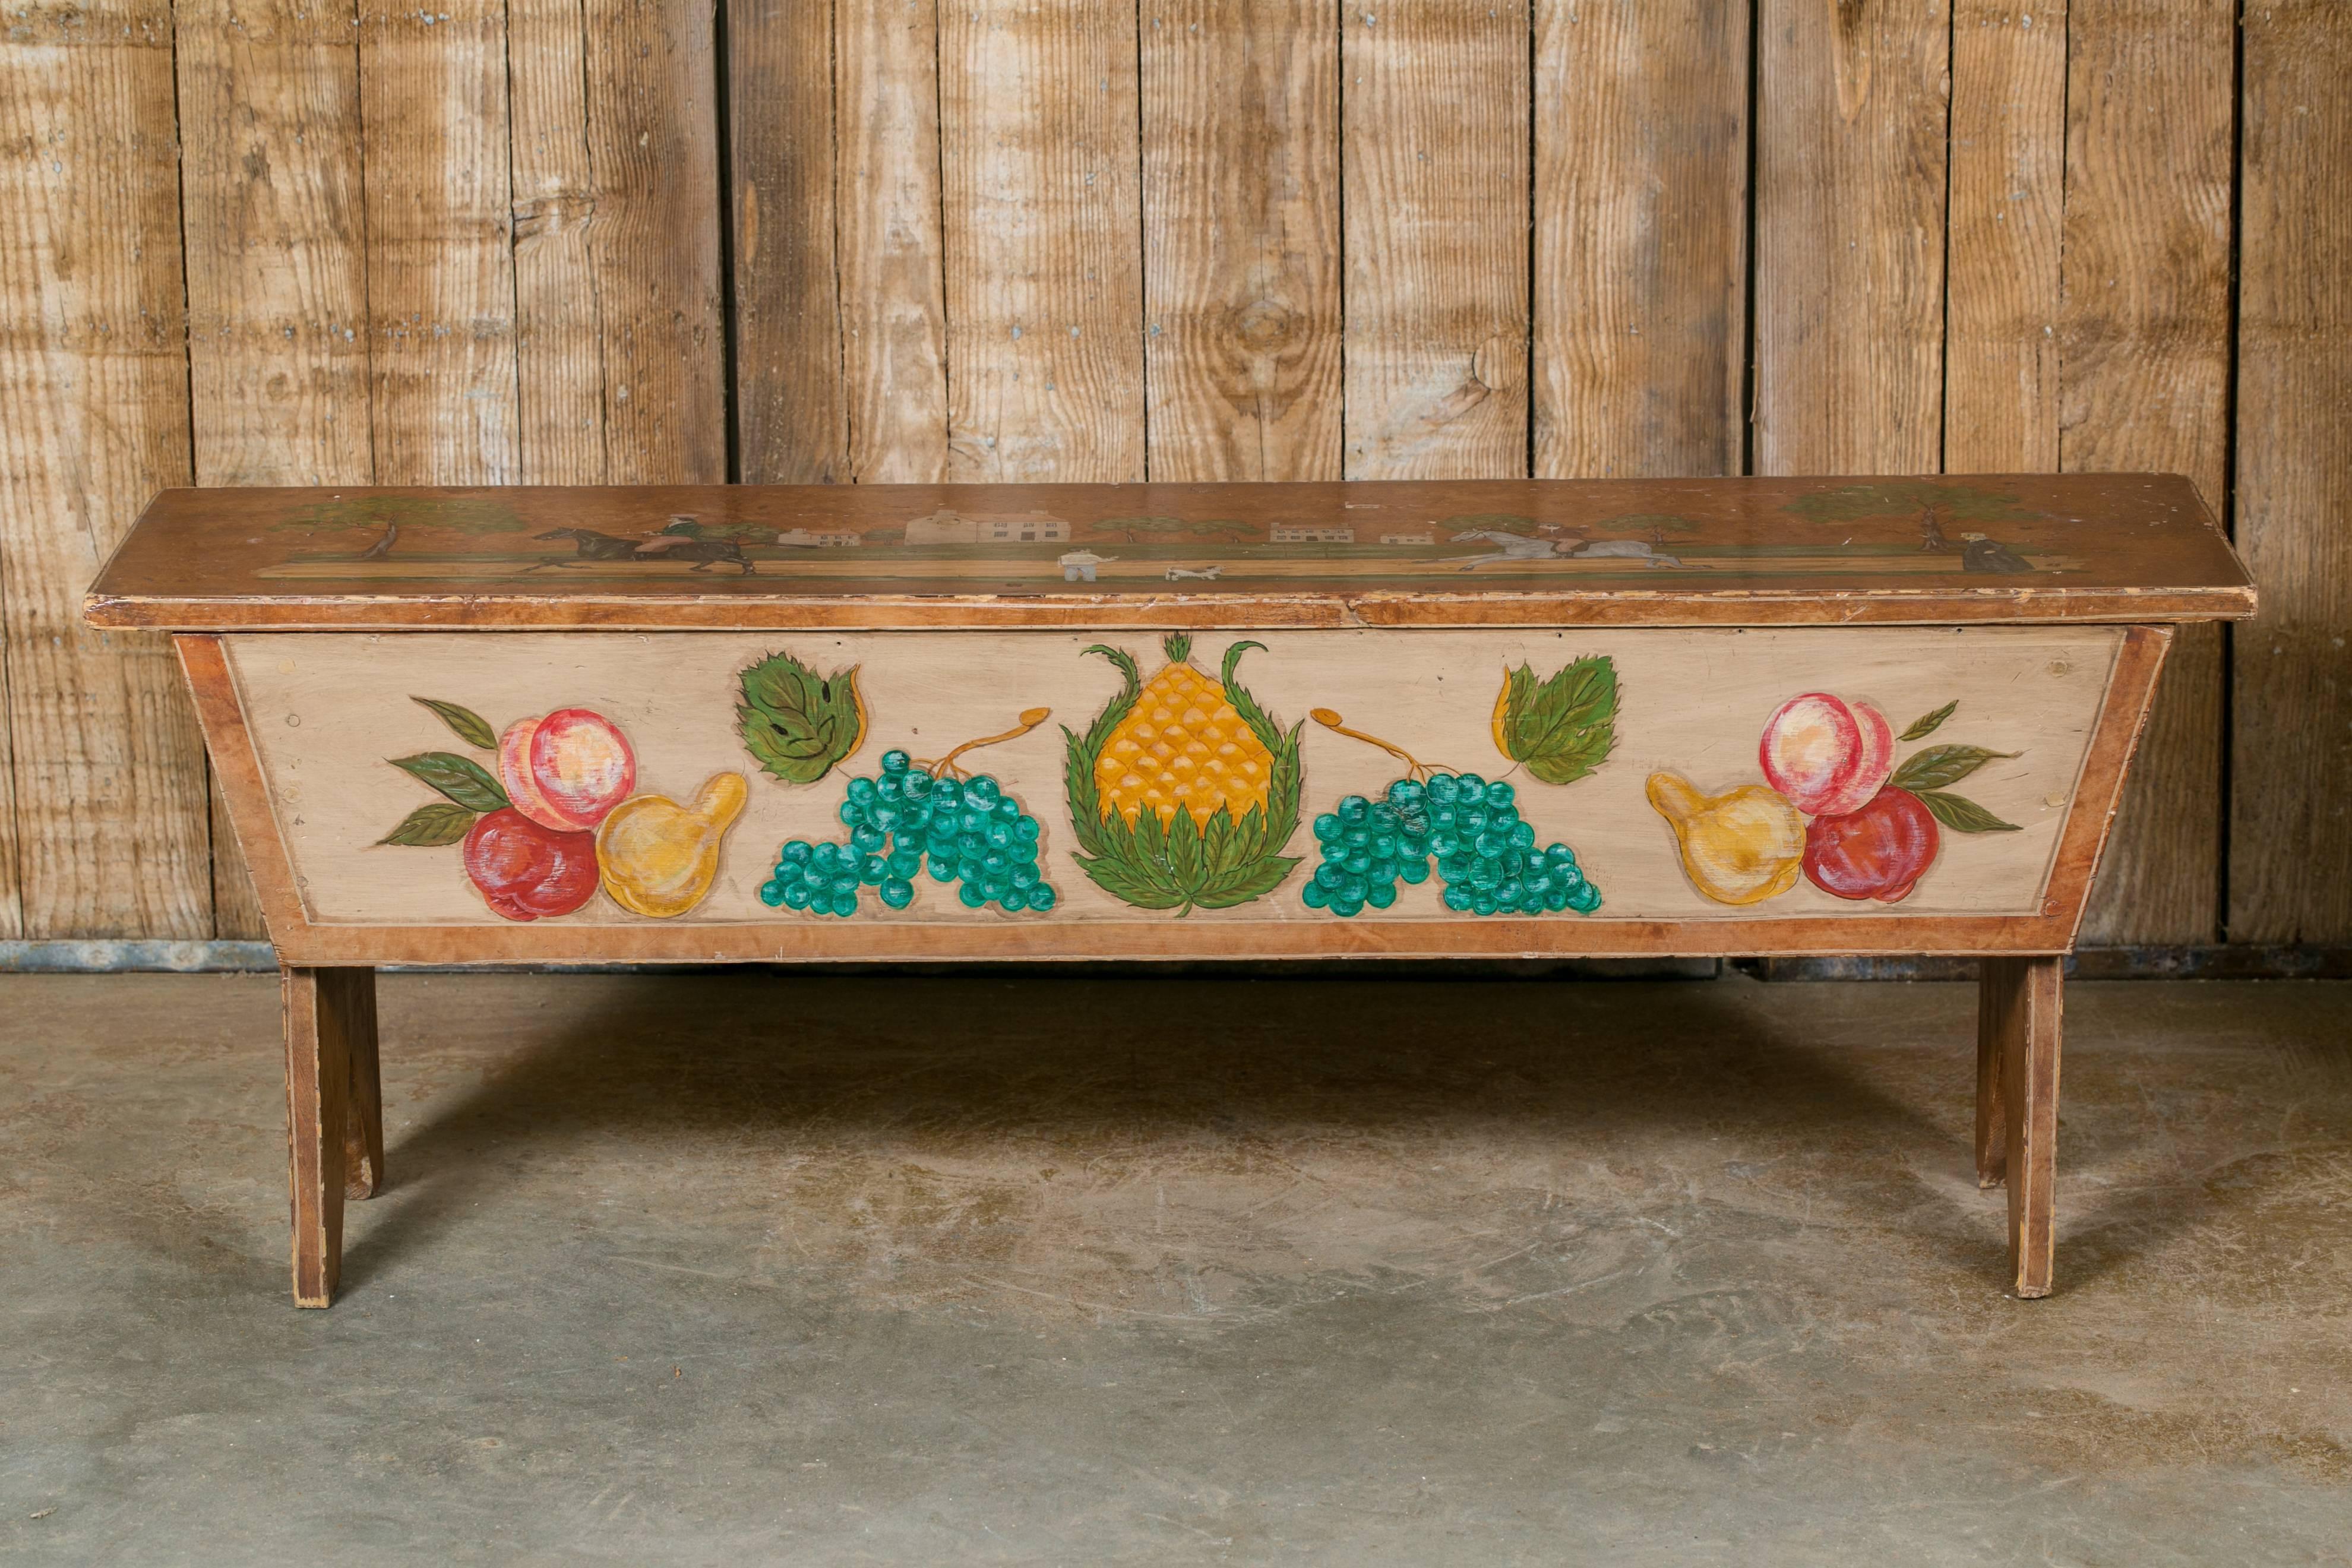 Antique American wooden bench, circa 1890, hand-painted by American Folk Artist, Lew Hudnall, in the 20th century. The scenes on the top and back panel show men on horseback and houses. Scene on the front panel shows a pineapple in the centre,